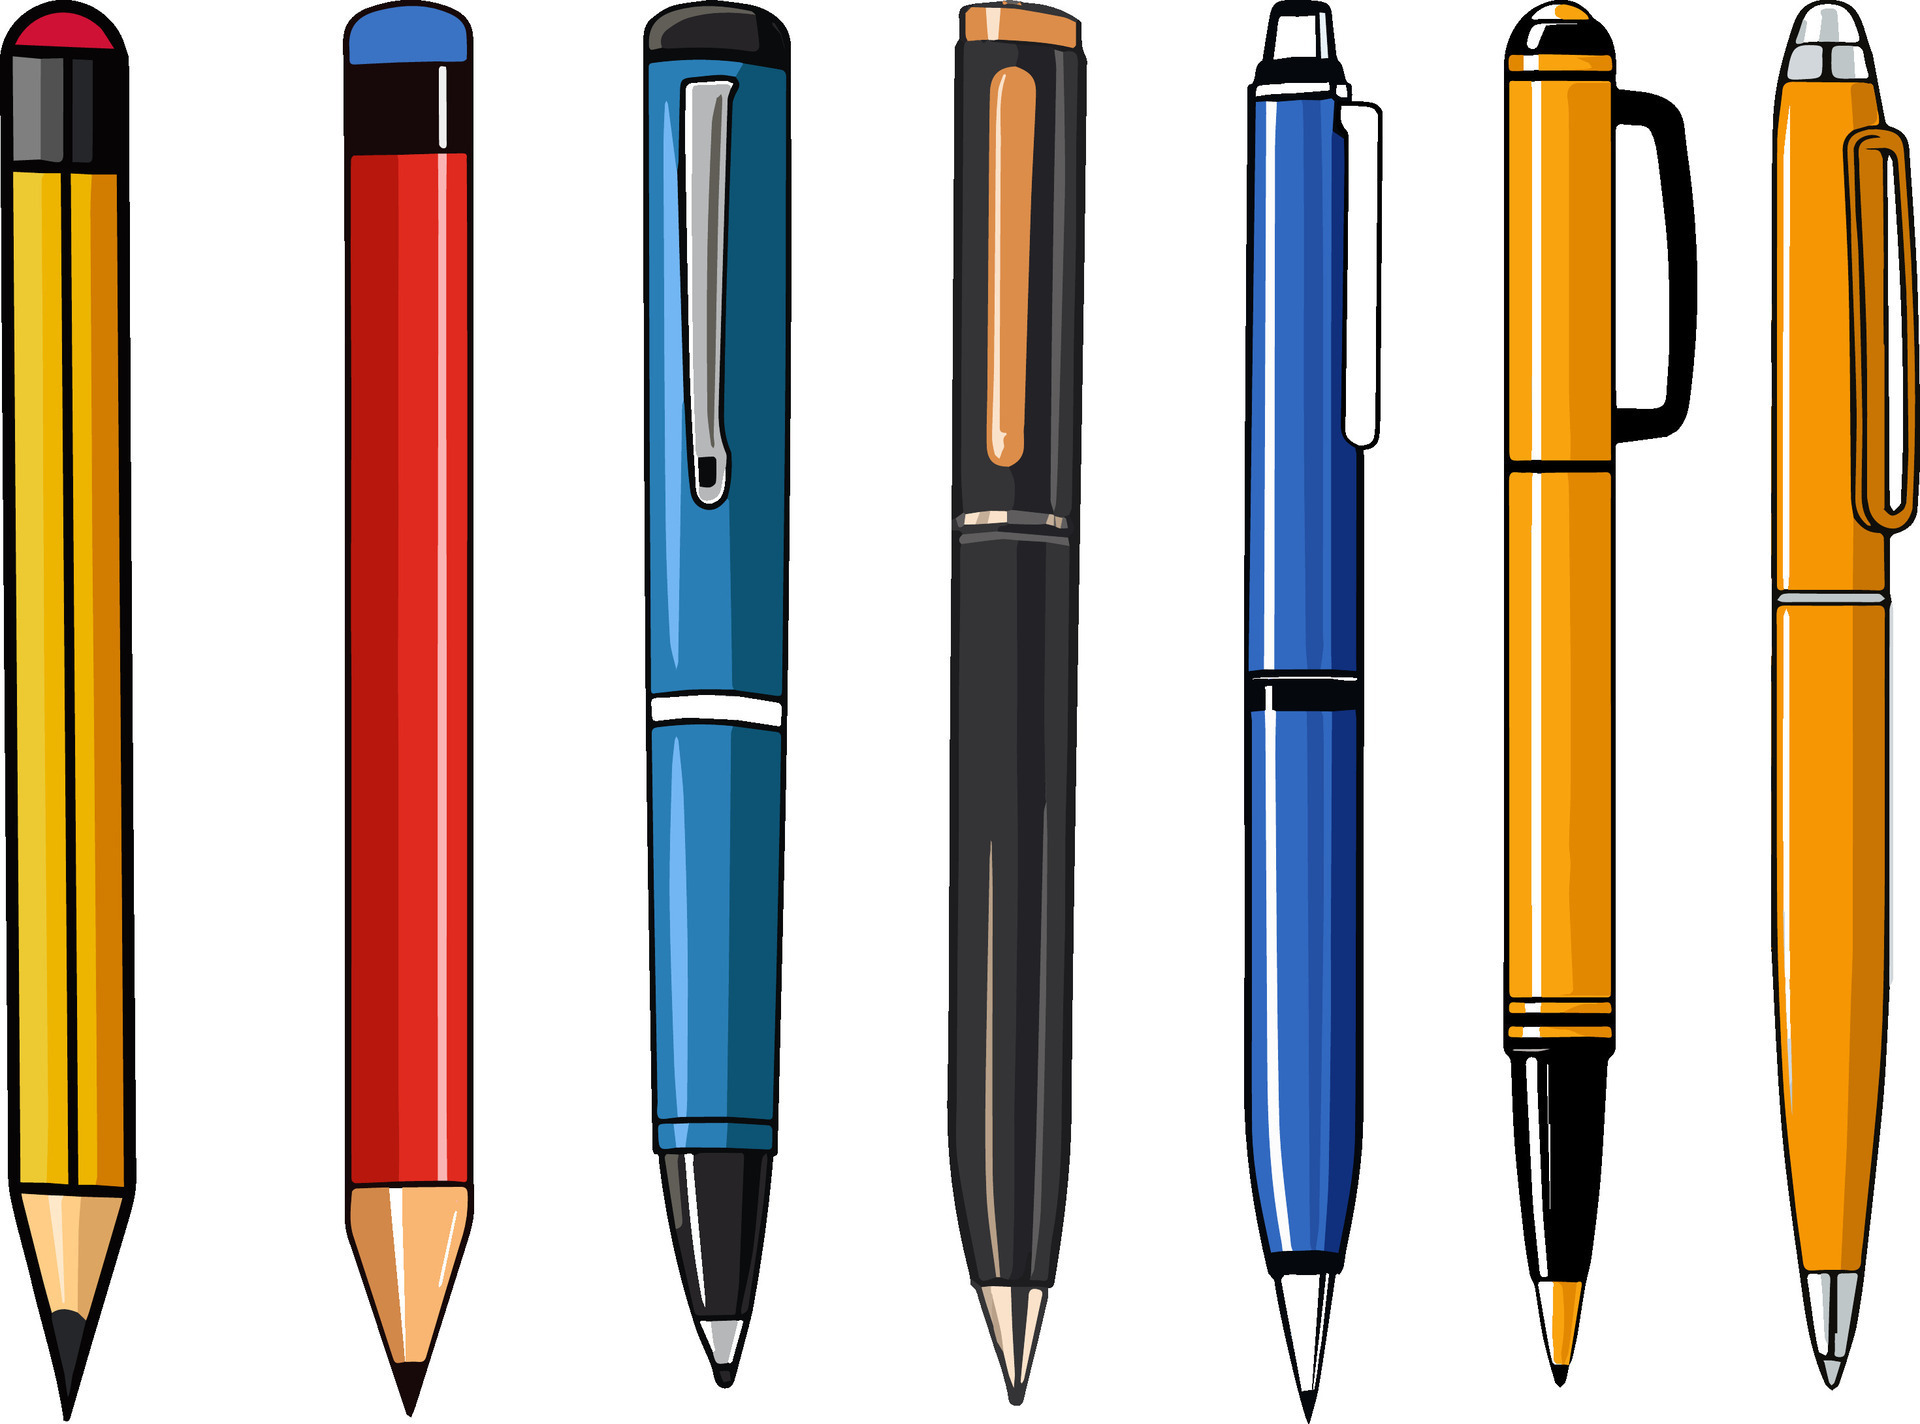 Premium Vector  Office stationery for drawing and writing pens pencils and  colored markers